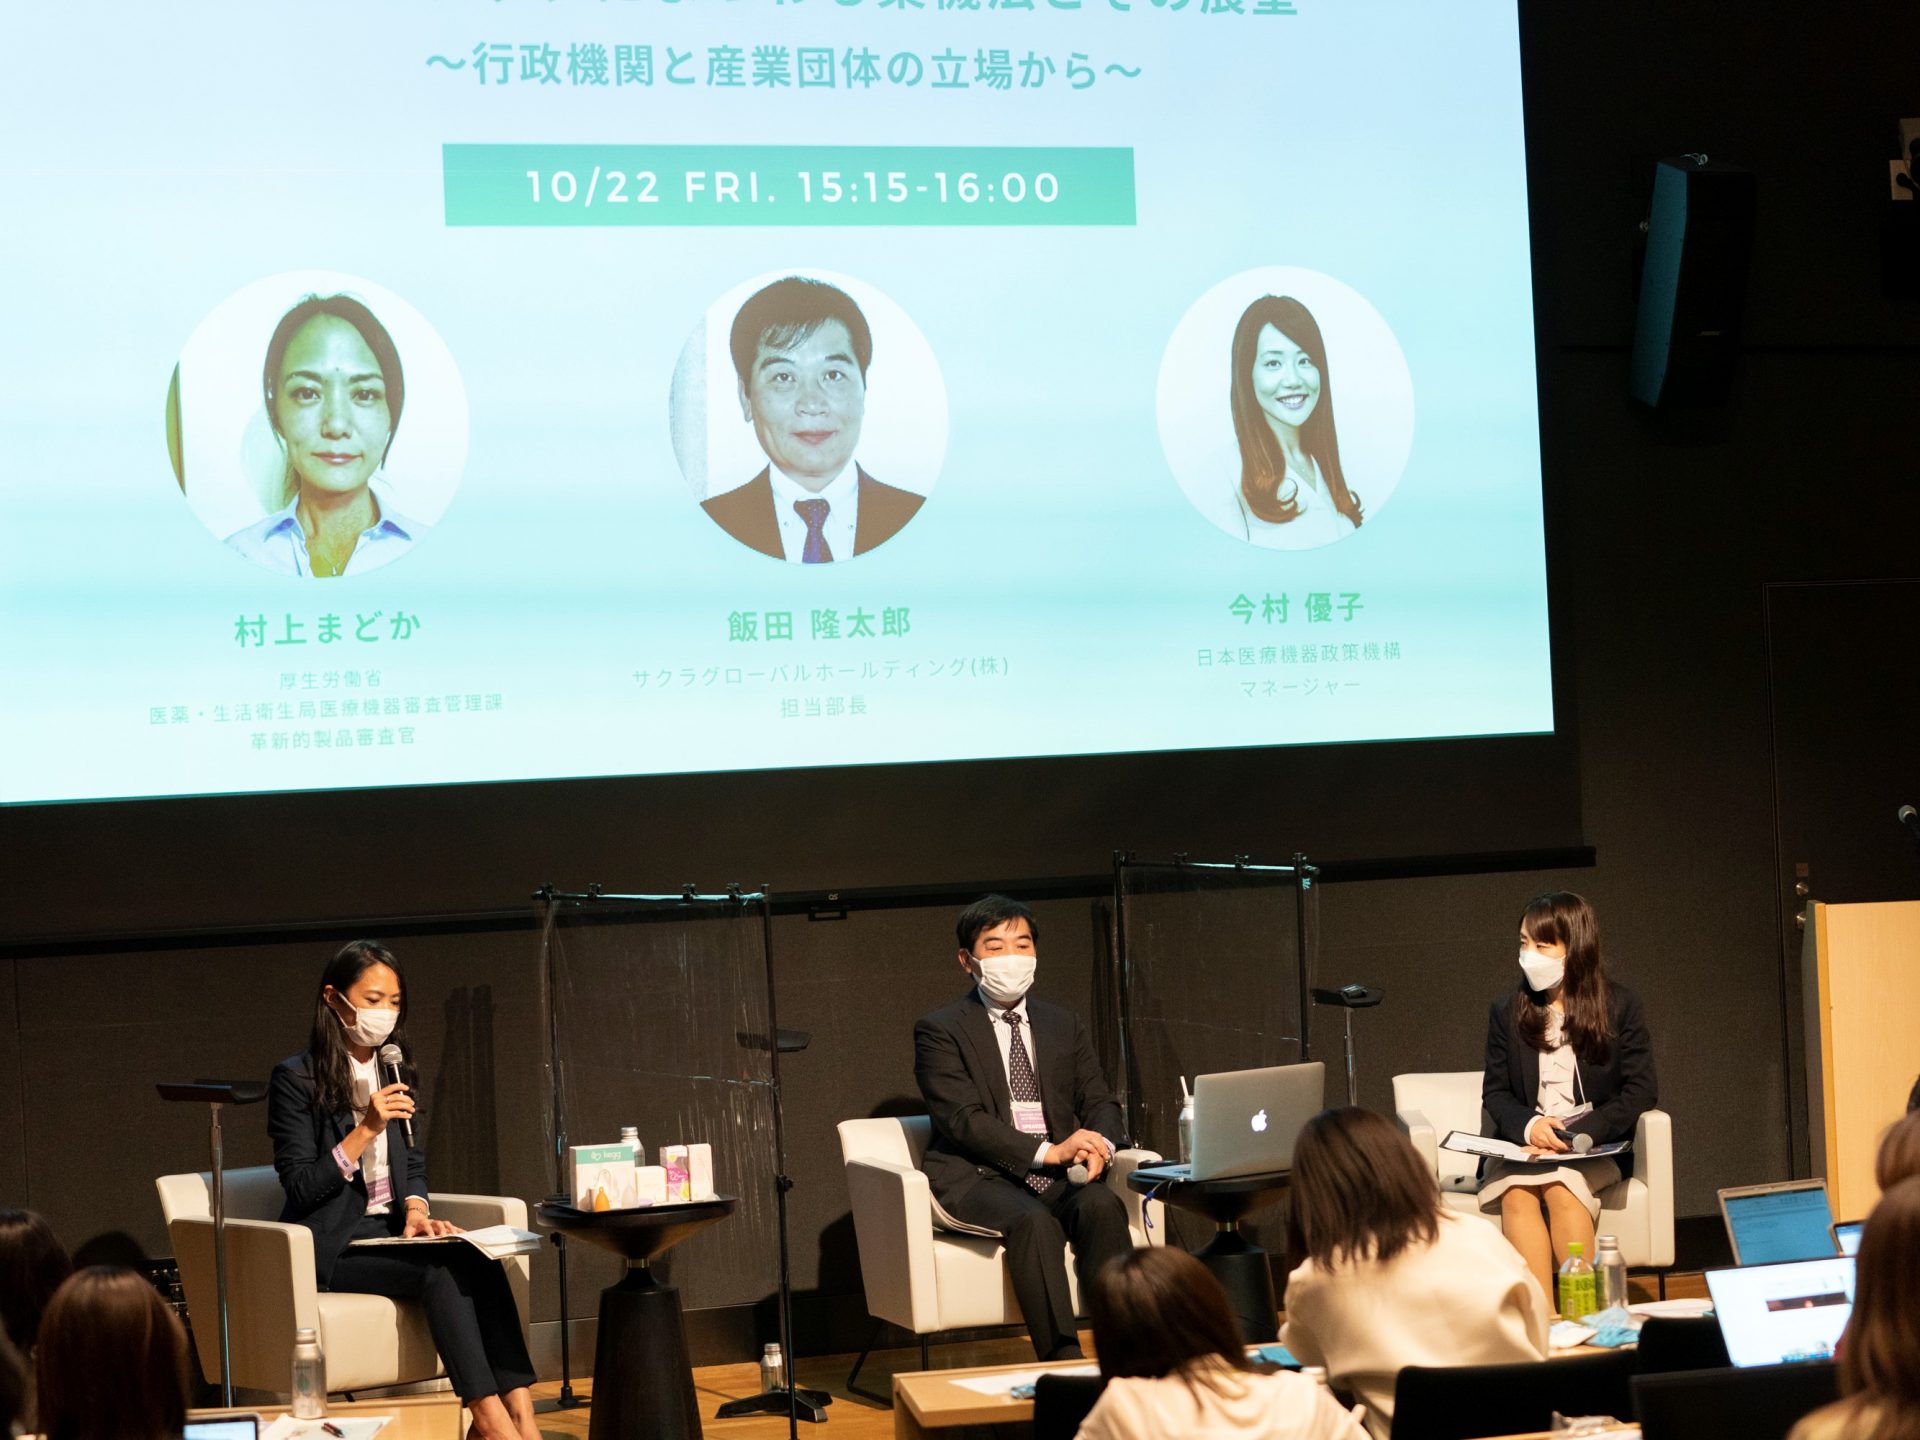 [Lecture and Event Report] “Femtech Fes! 2021 – Three Days That Will Transform Your Taboo Into a Heart-Pounding Thrill,” Co-hosted by fermata and HGPI (October 22 to 24, 2021)